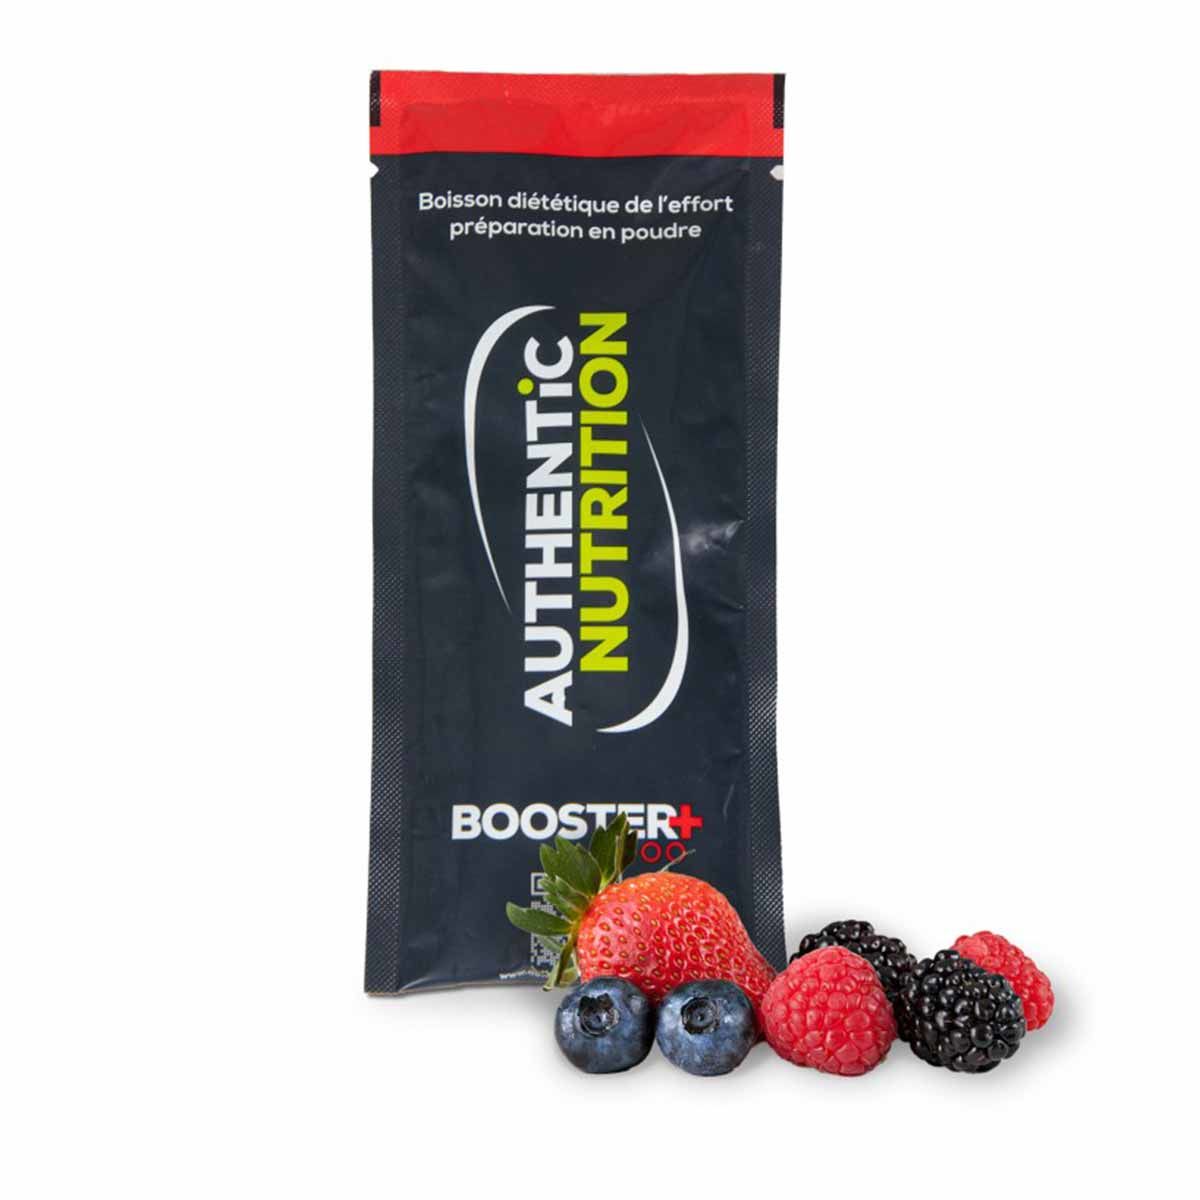 Authentic Nutrition Booster+ Energy Drink - Red berries